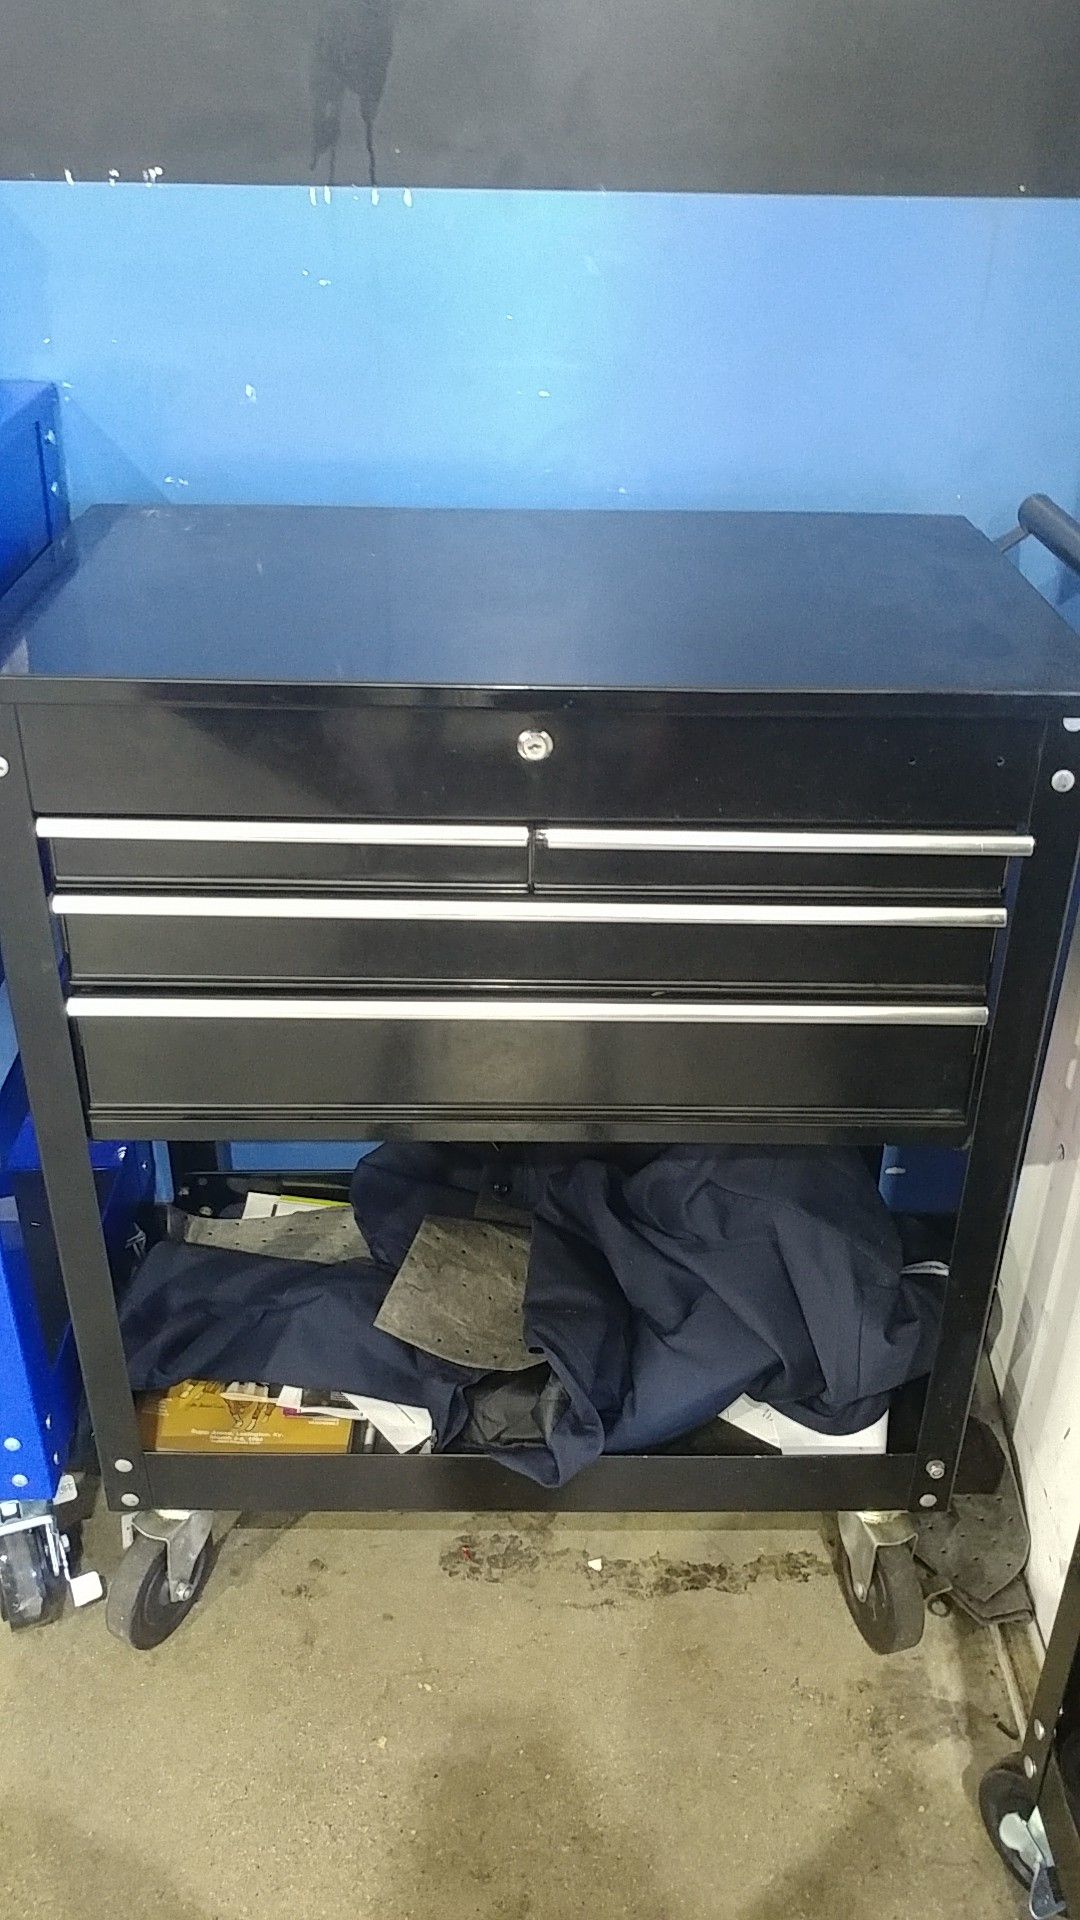 Us general toolbox (doesn't lock)